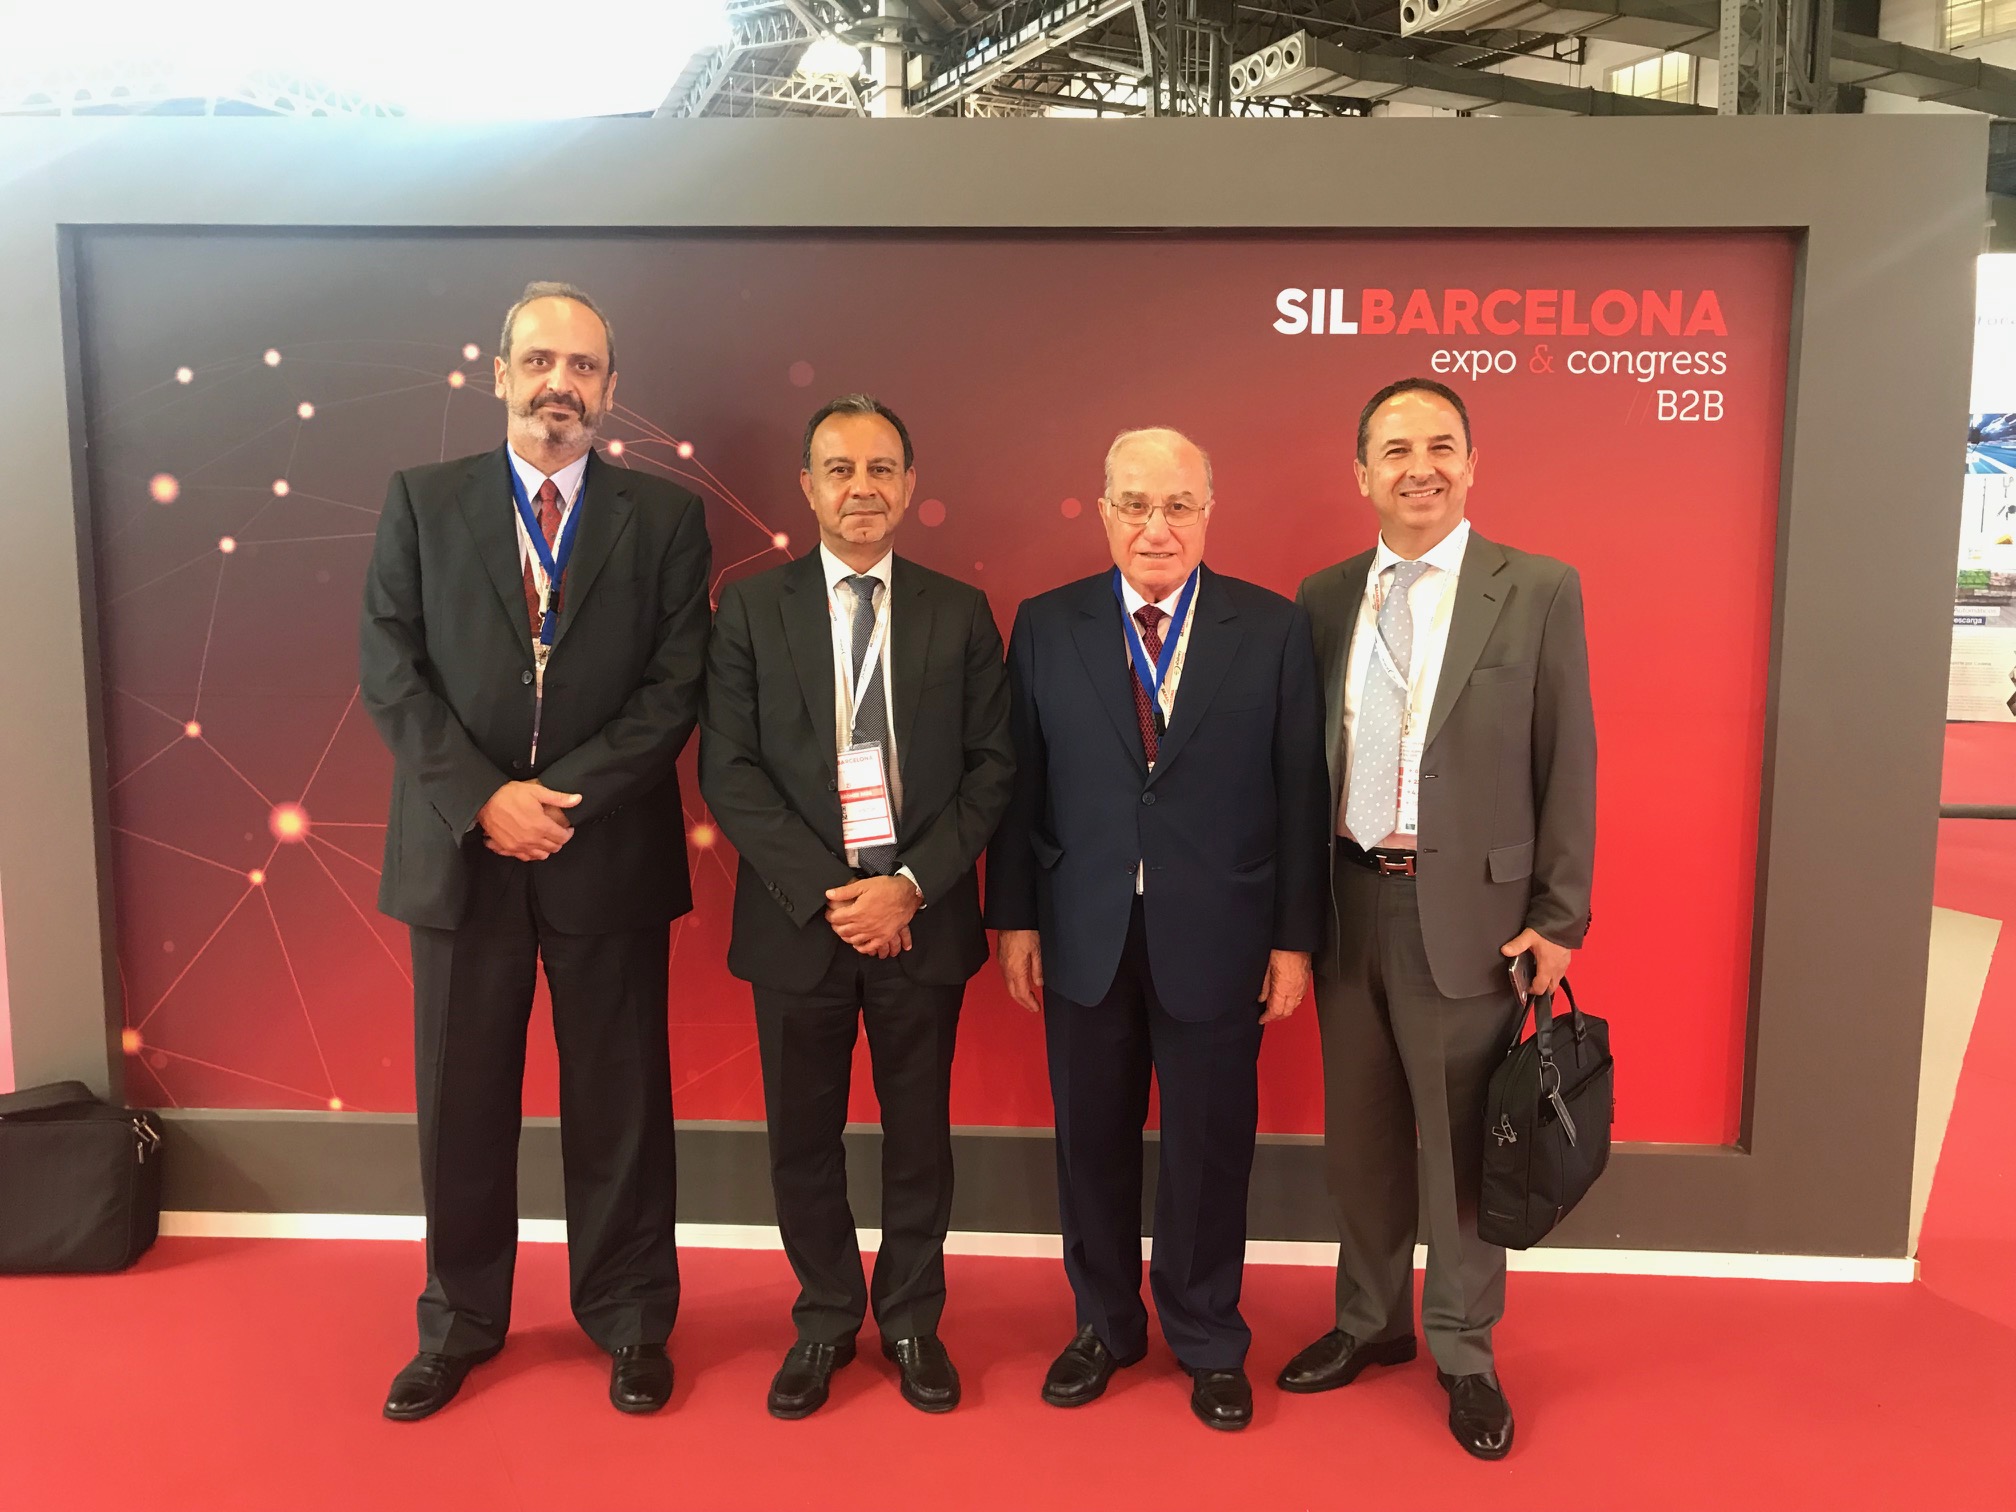 Chamber of Beirut & Mount Lebanon within the EBSOMED Sector Alliance Committee of Logistics & Transport organized by ASCAME at SIAL 2019, Barcelona